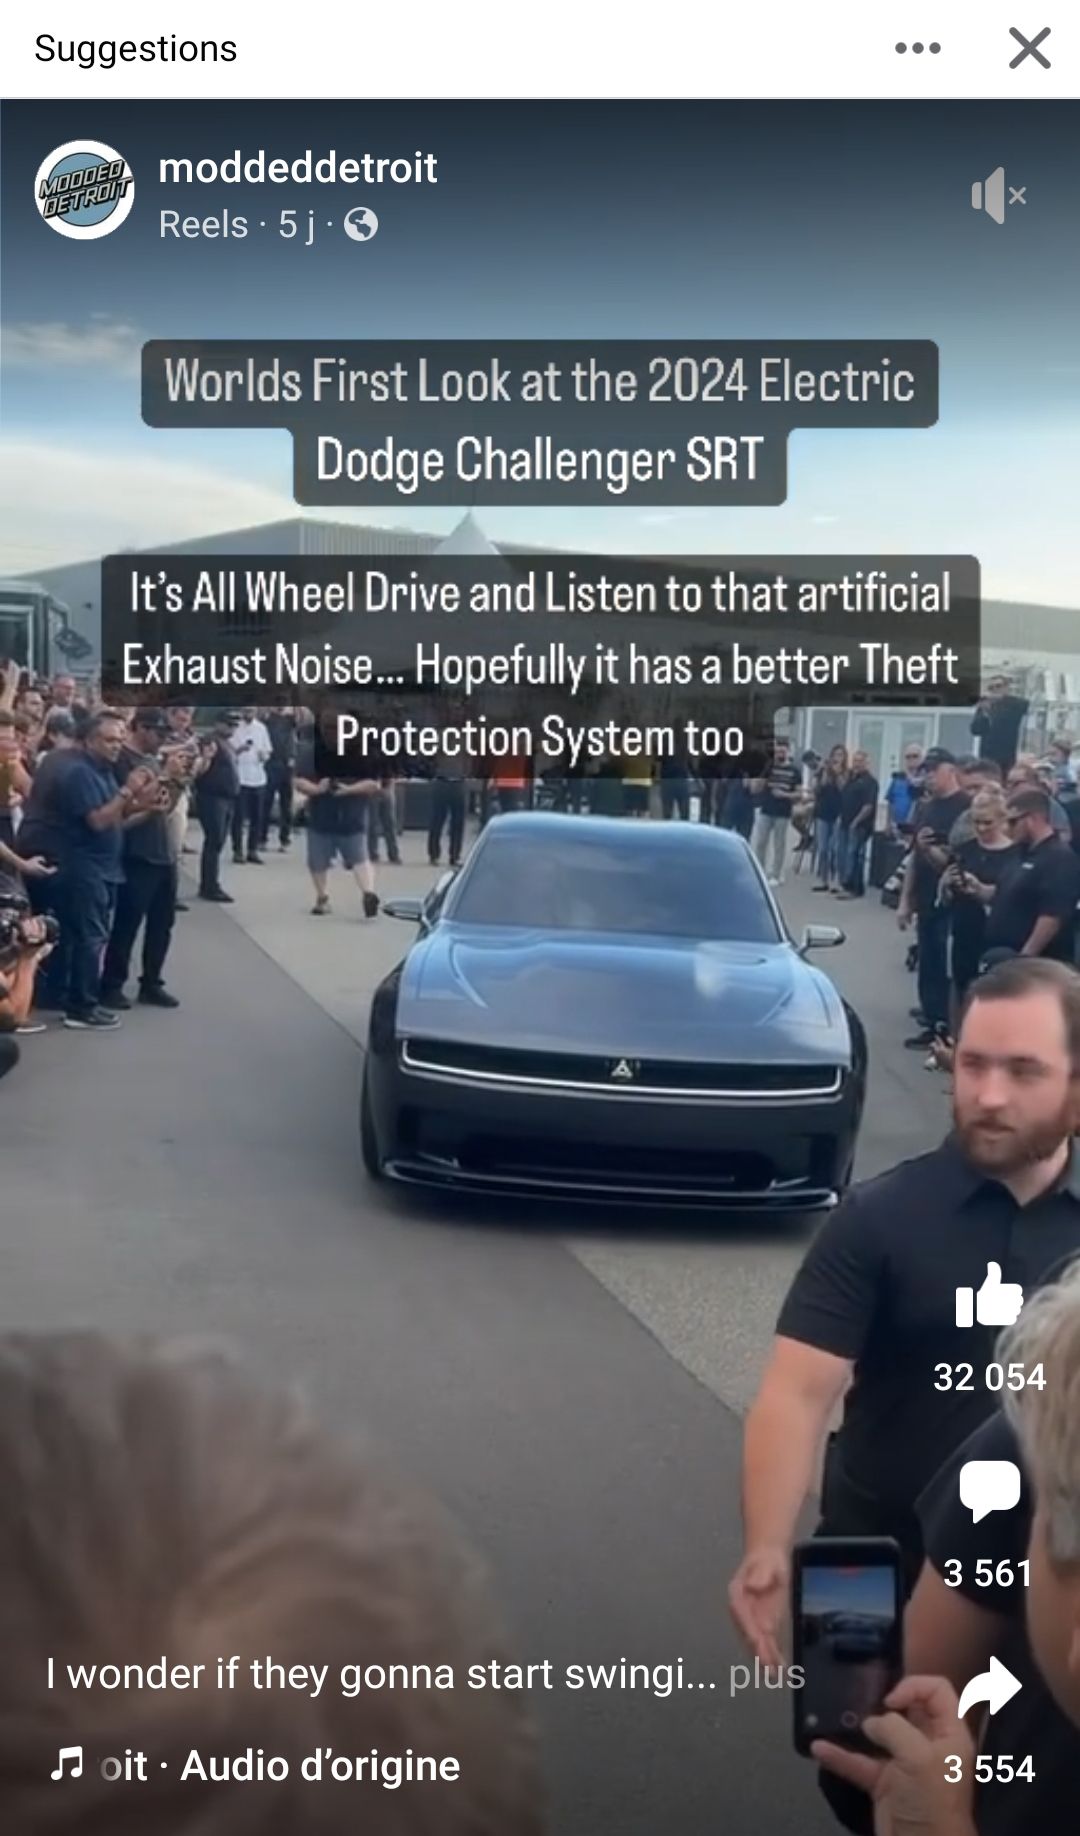 Video of a 2024 electric dodge challenger SRT